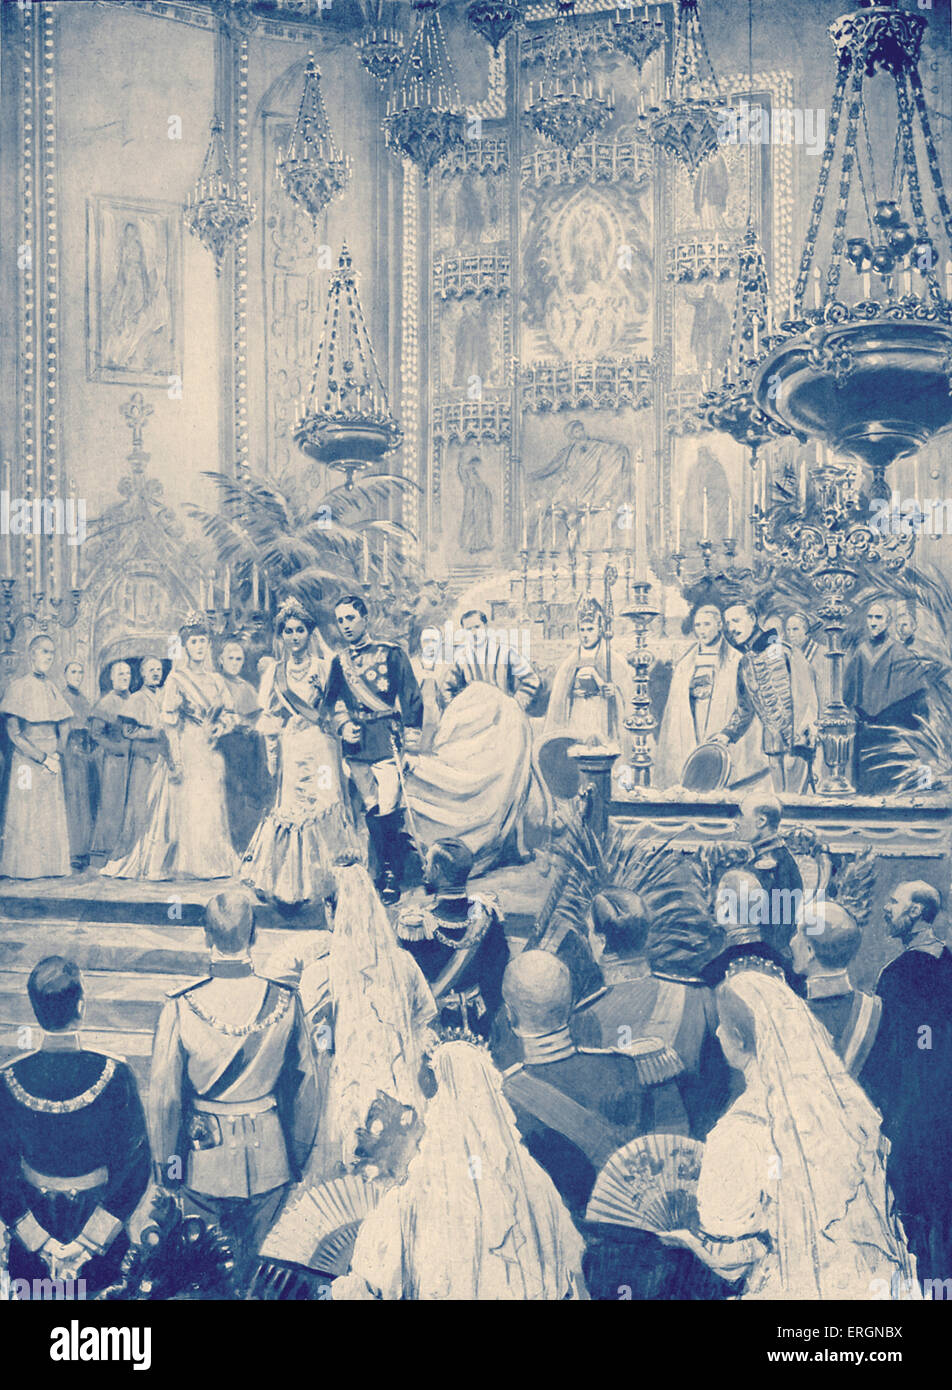 King Alfonso of Spain 's marriage to Princess Victoria Eugenie Ena - Madrid, 31 May 1906. Niece of Edward VII. From illustration of S. Begg of the period, showing the couple leaving the altar in the Church of San Jerónimo. Alfonso XIII of Spain, King of Spain from 1886 until 1931, 17 May 1886 – 28 February 1941. Stock Photo